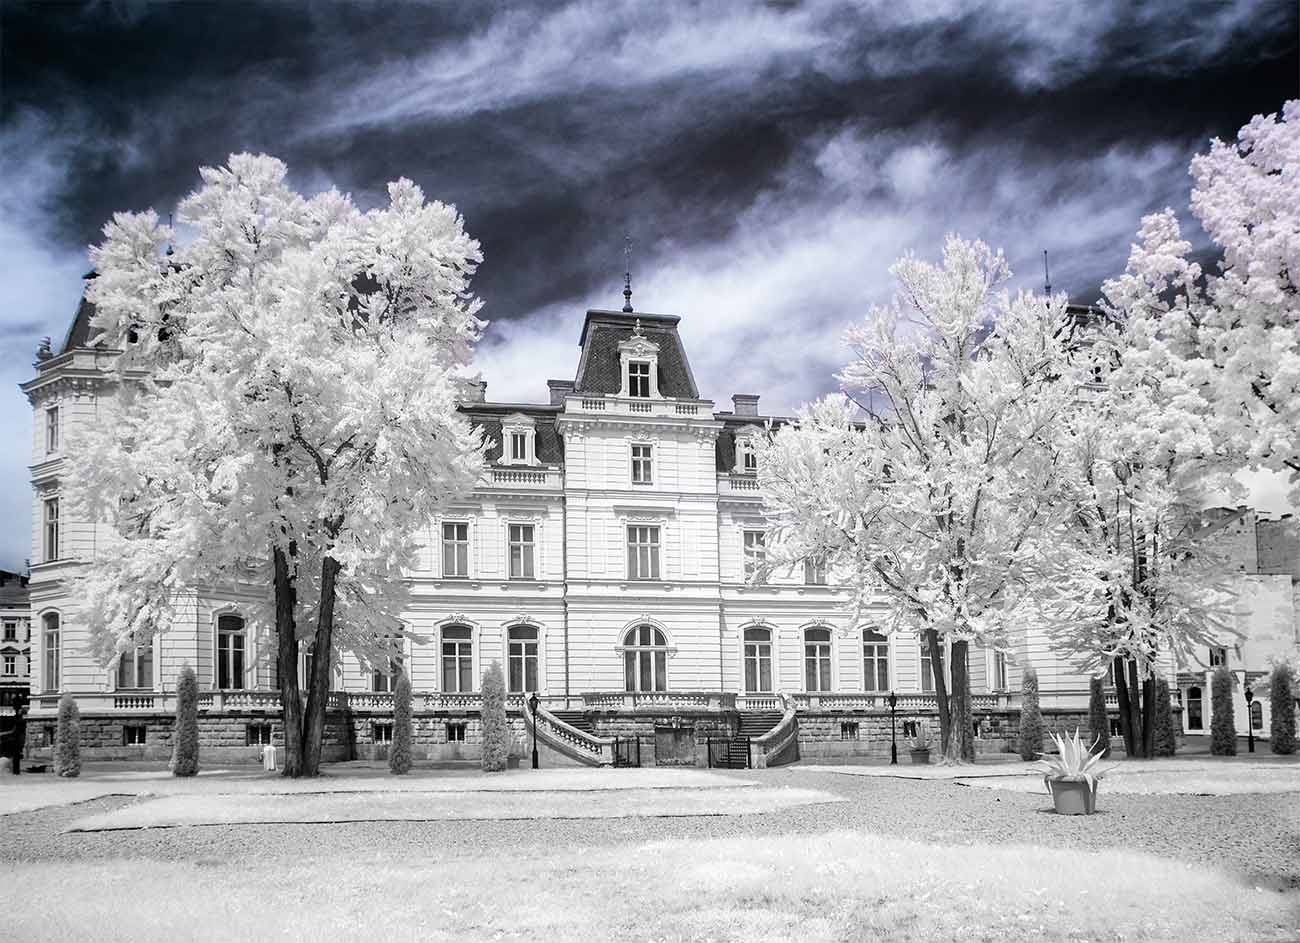 How to make an infrared photo in Photoshop